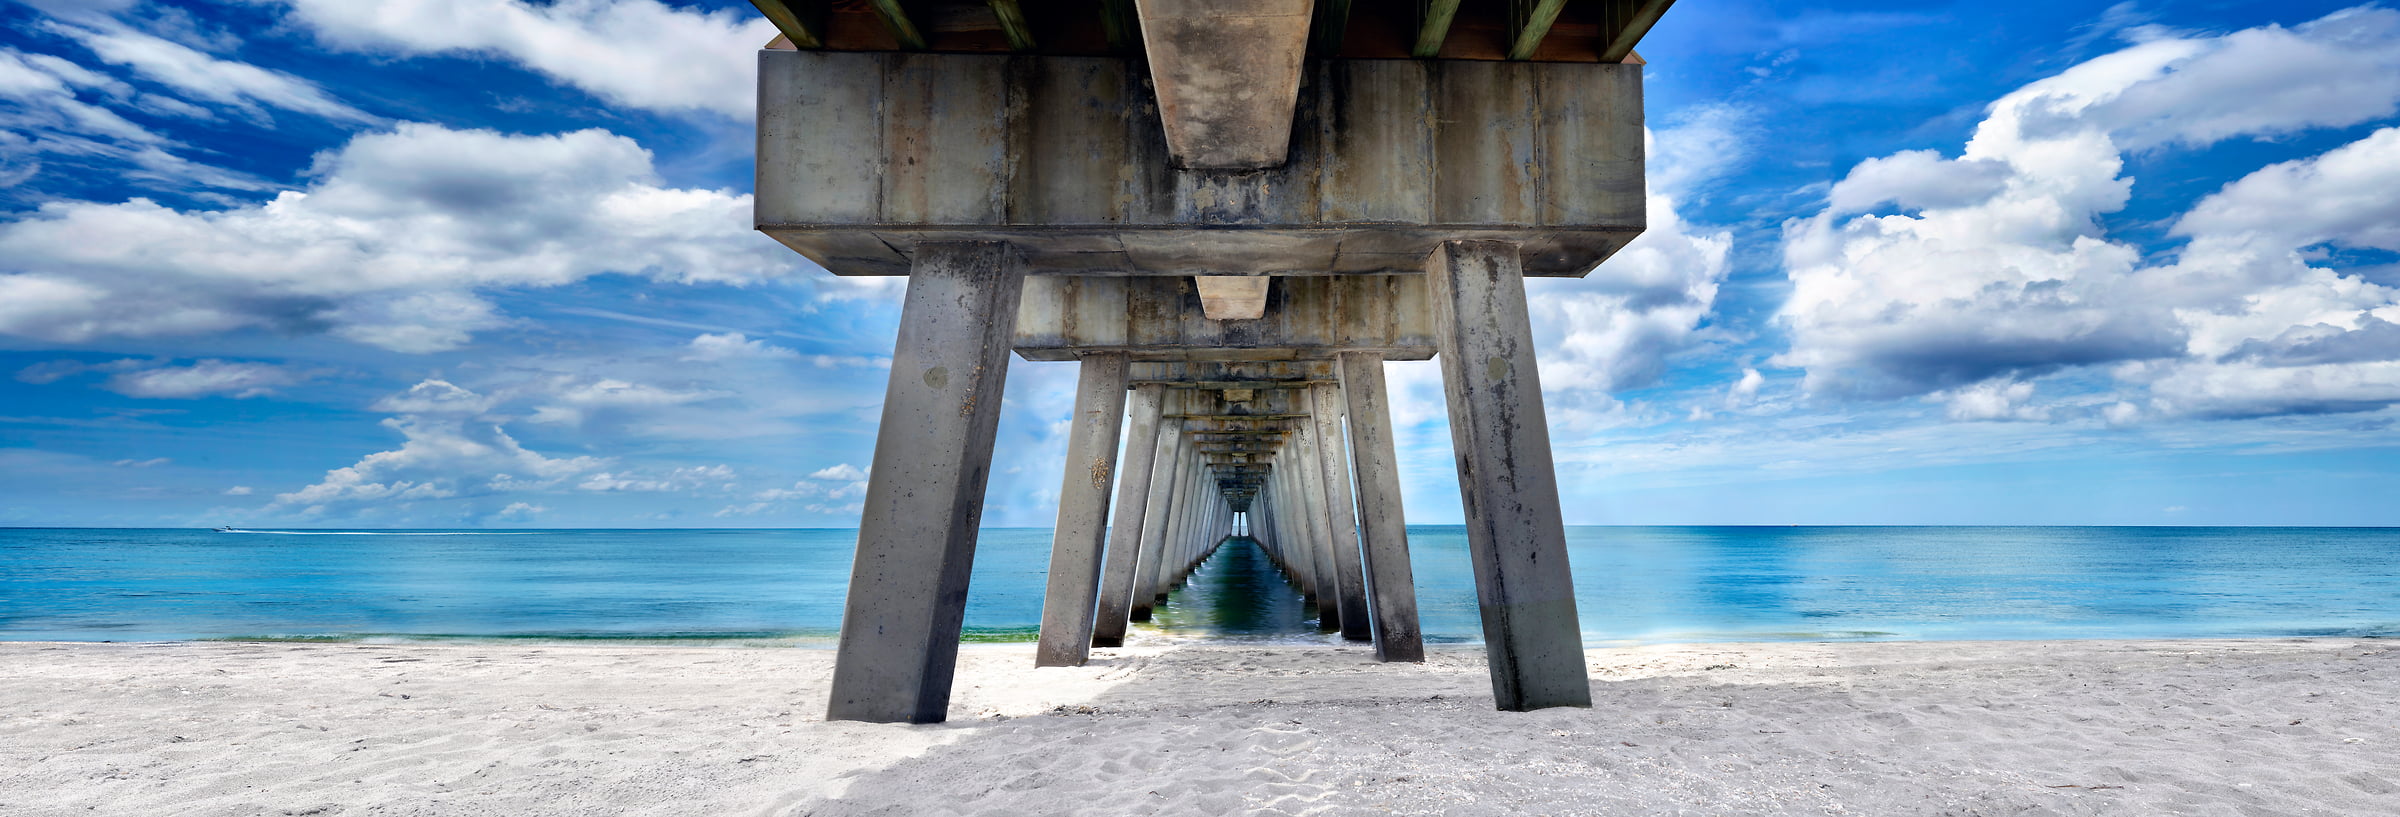 306 megapixels! A very high resolution, large-format VAST photo print of a beach scene under a pier with the ocean and sand; photograph created by Phil Crawshay in Venice Pier, Venice, Florida.